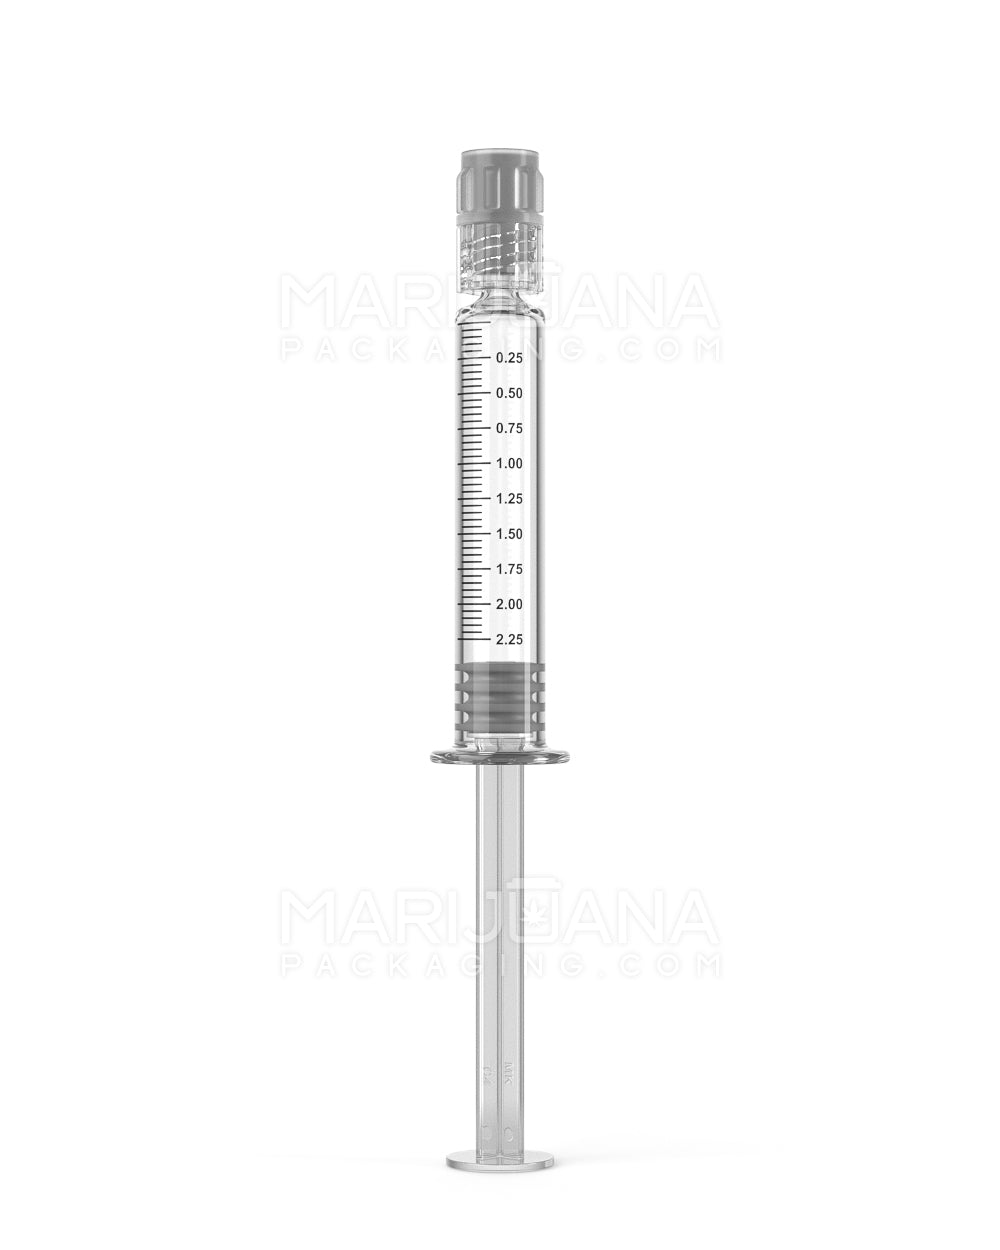 Luer Lock | Glass Dab Applicator Syringes | 2.25mL - 0.25mL Increments - 100 Count - 1